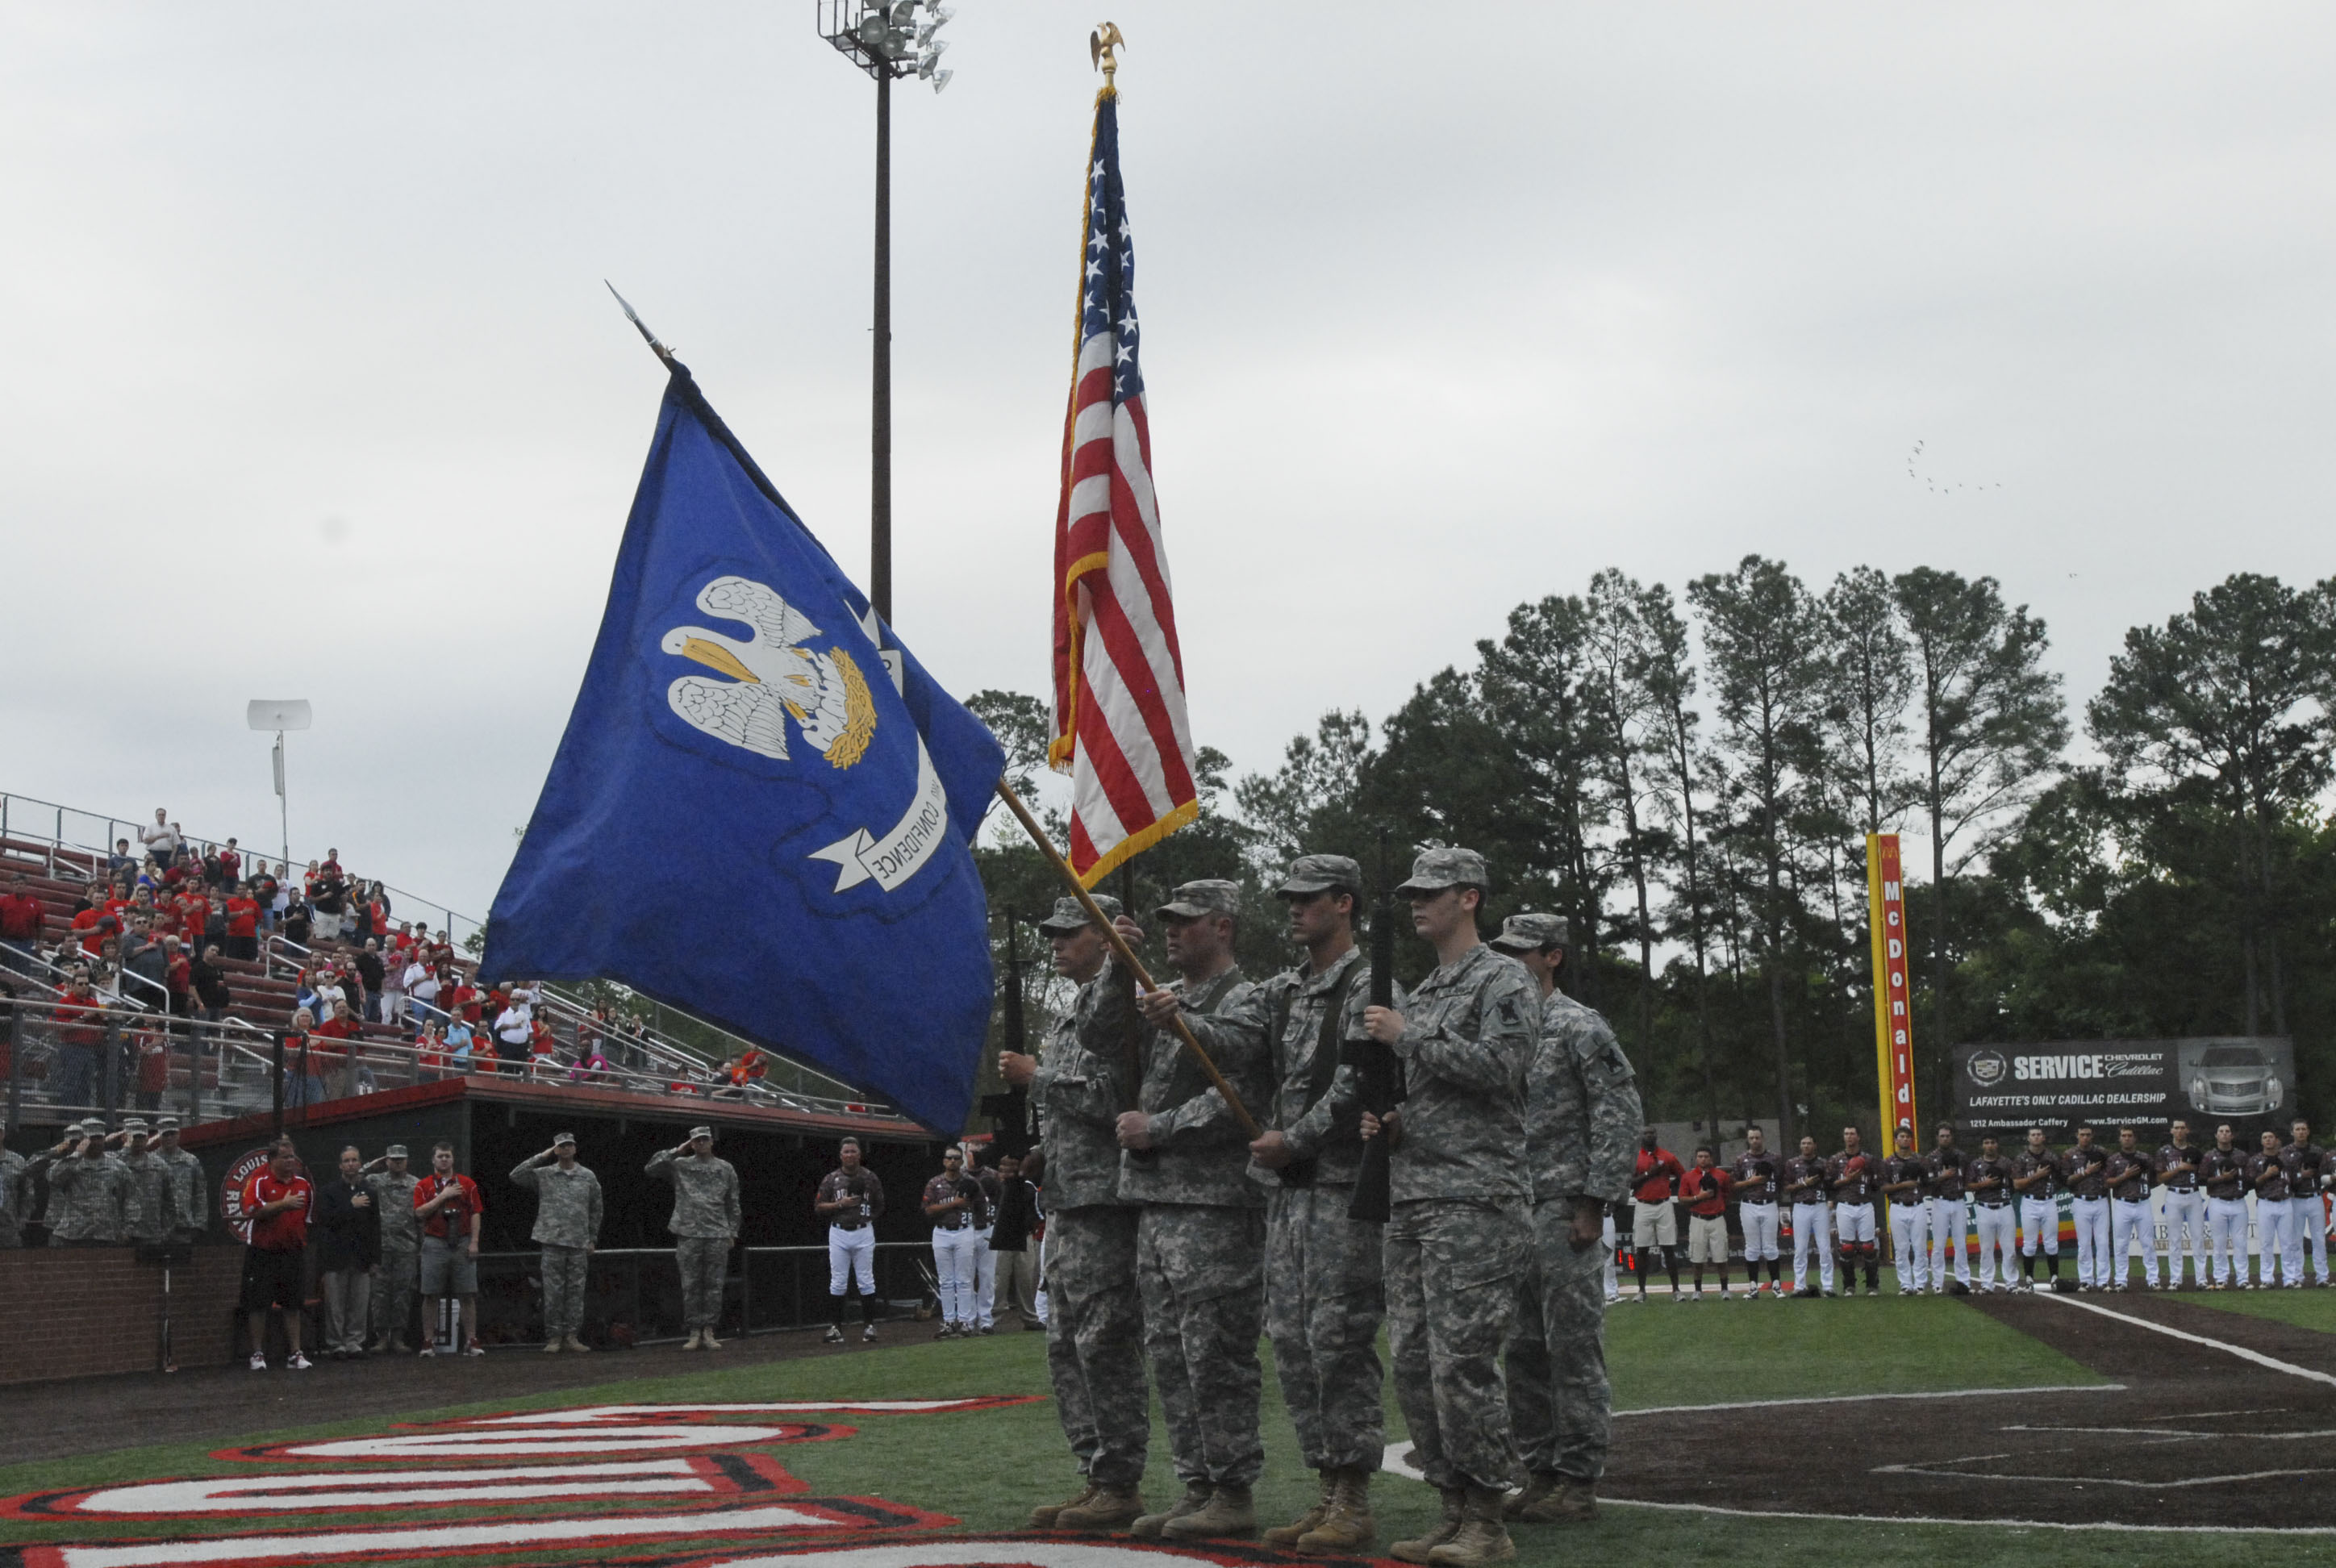 ULL recognizes 256th Soldiers at baseball game